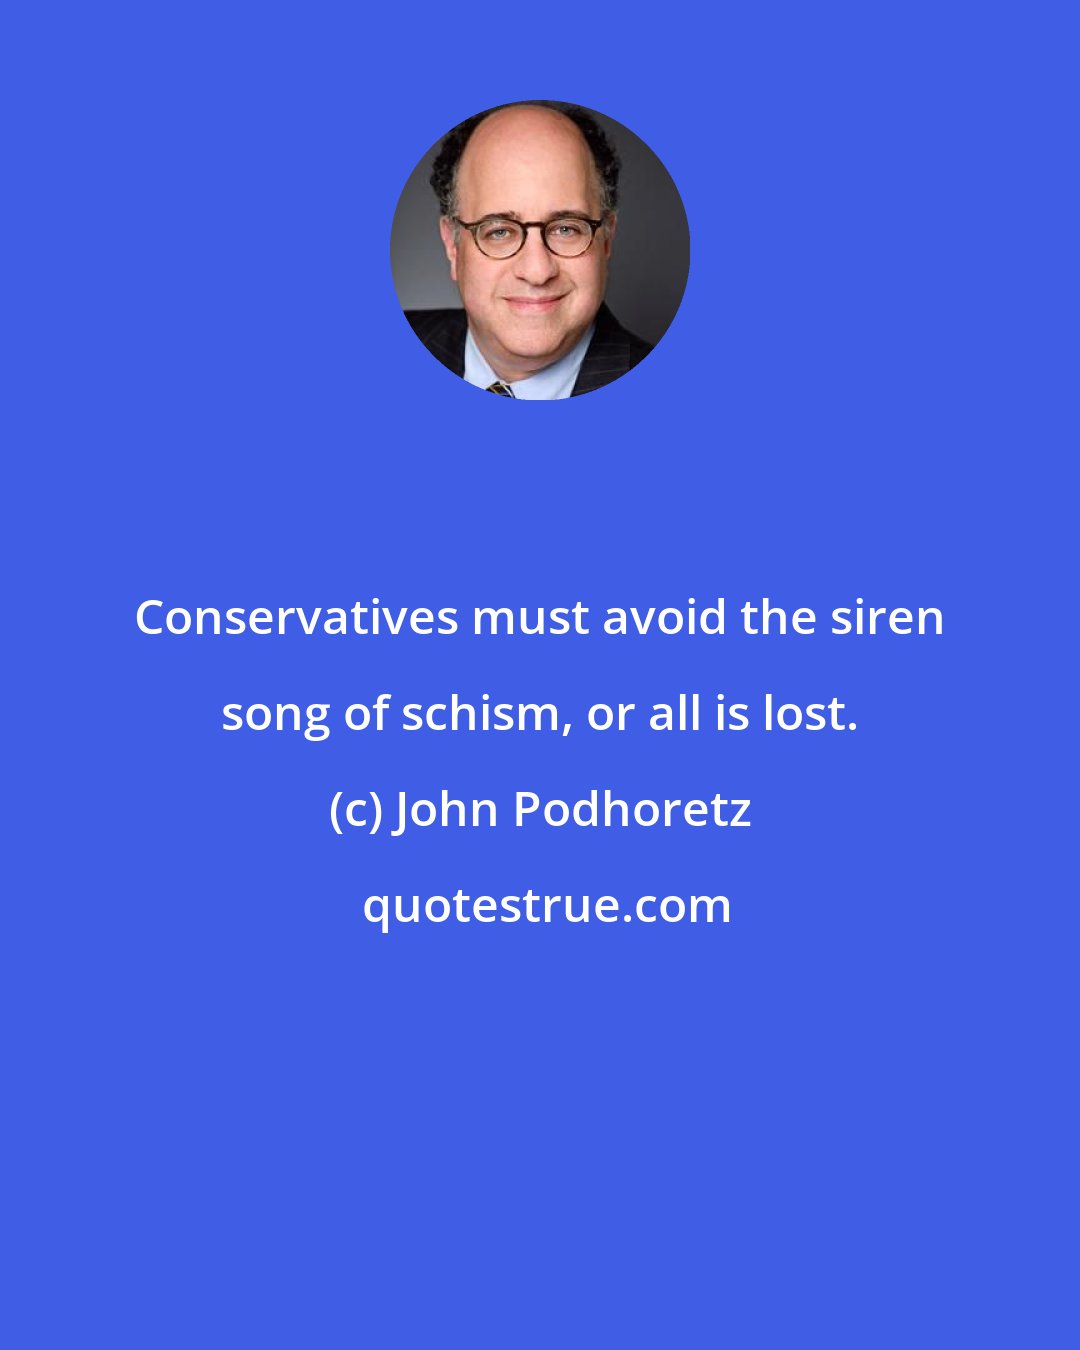 John Podhoretz: Conservatives must avoid the siren song of schism, or all is lost.